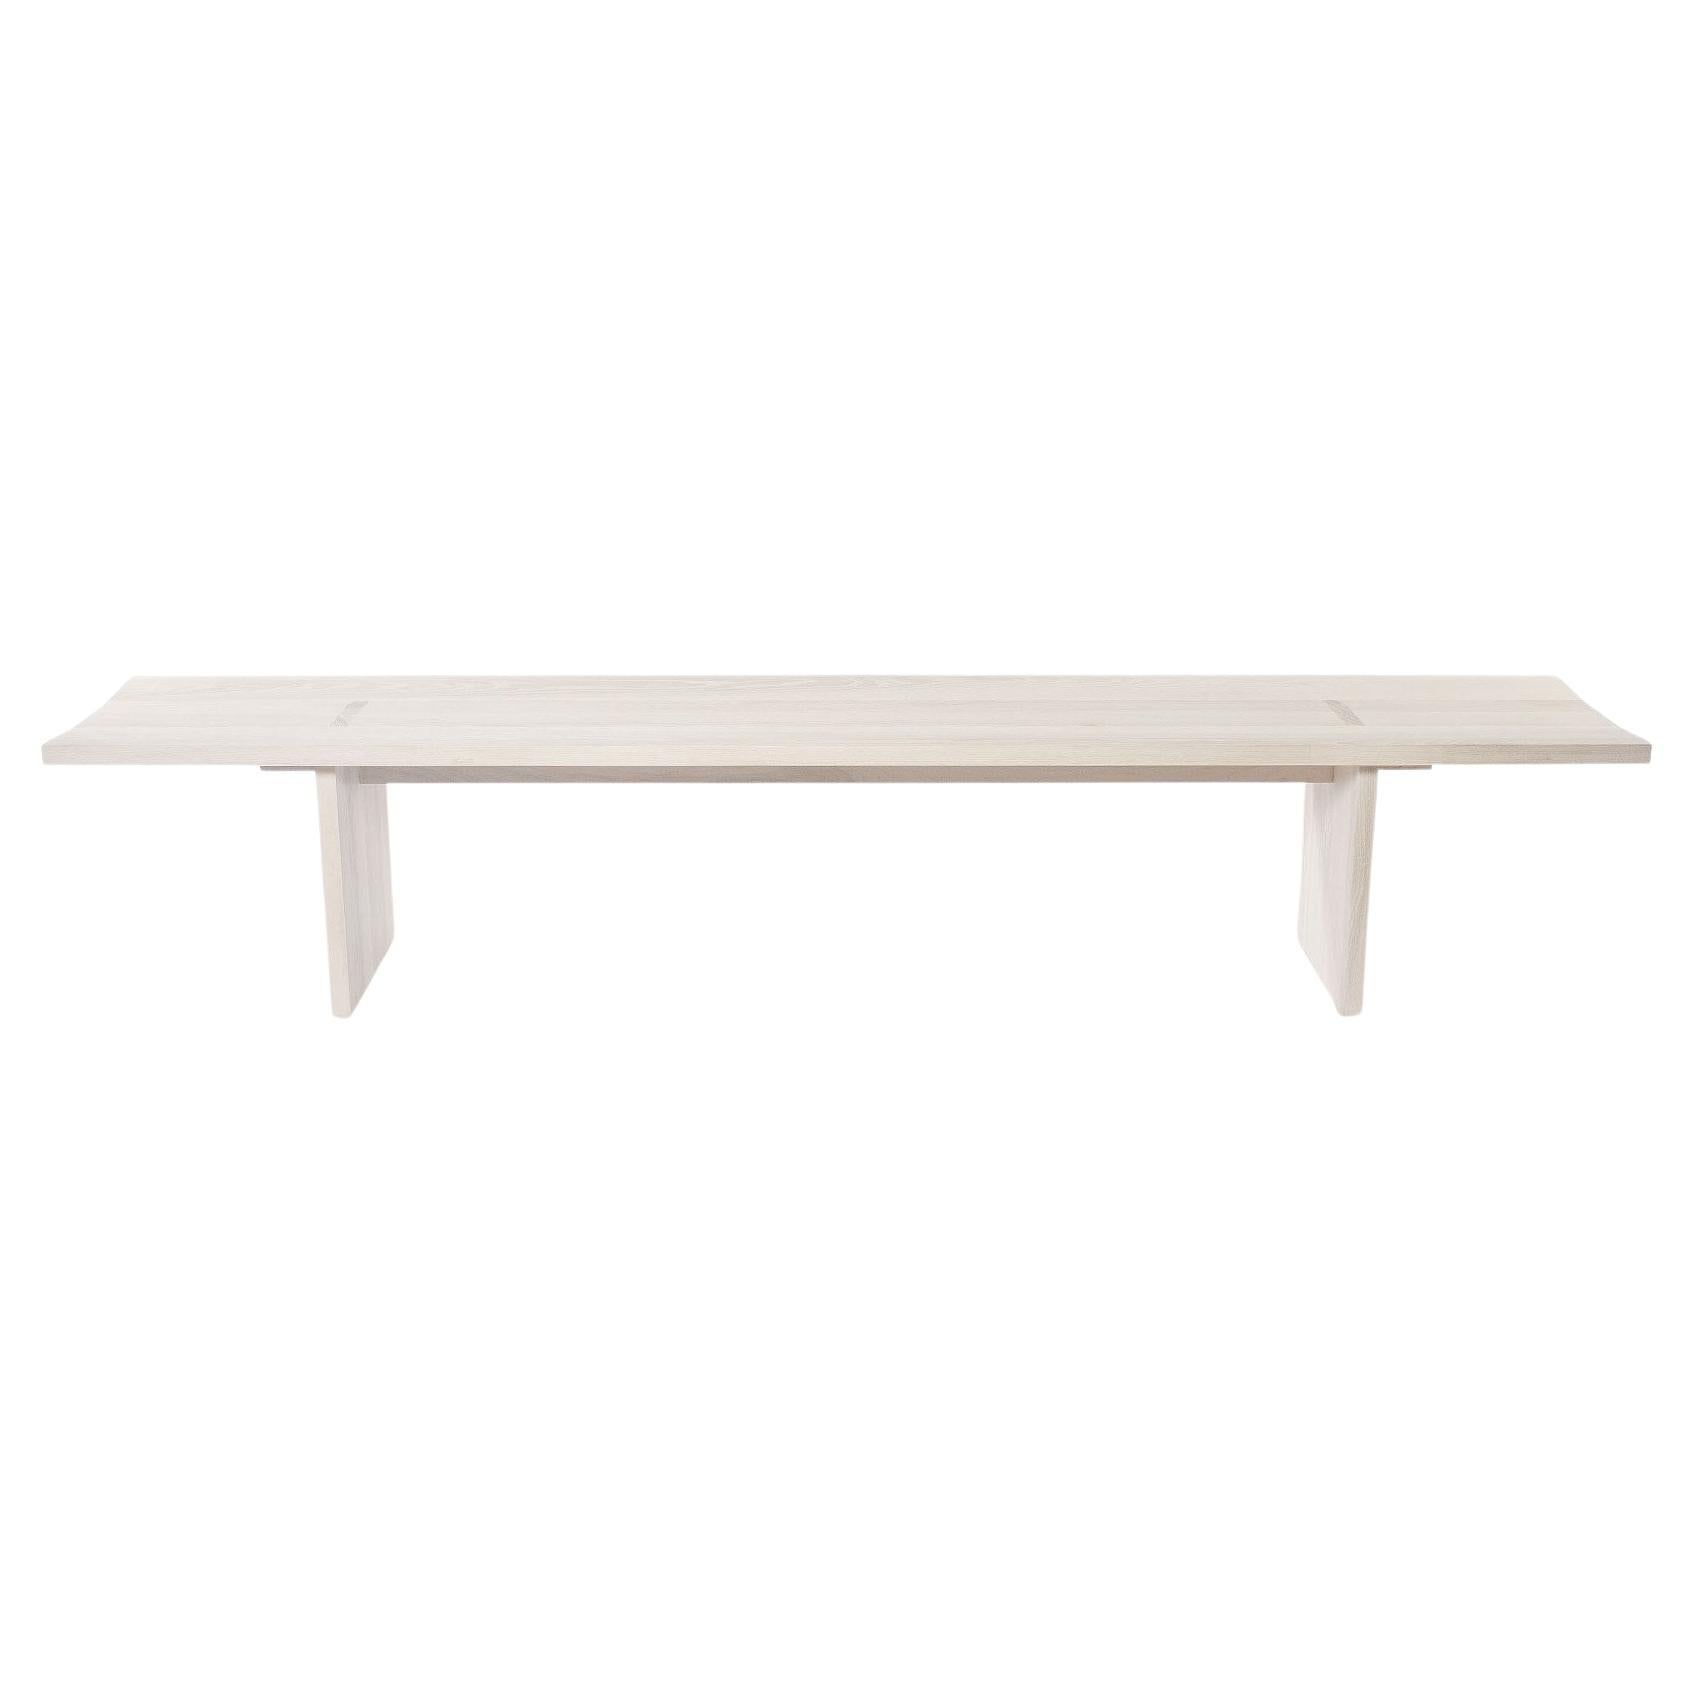 Handcrafted Solid White Ash Himes Bench 60"L by Mary Ratcliffe Studio For Sale